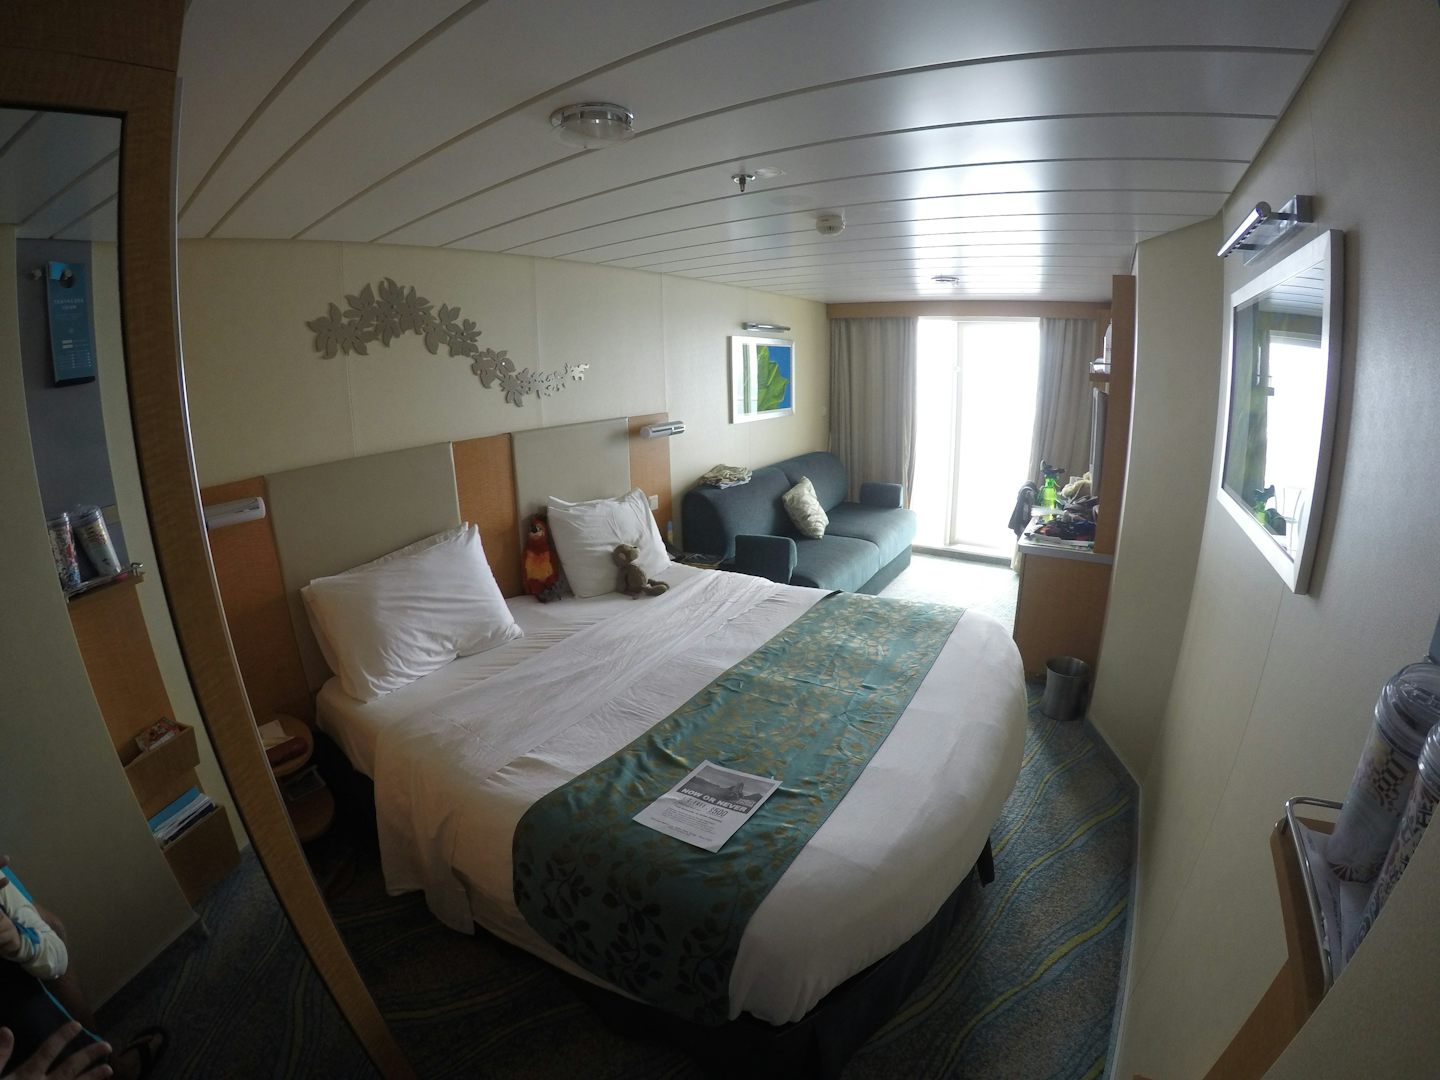 Our stateroom #11208